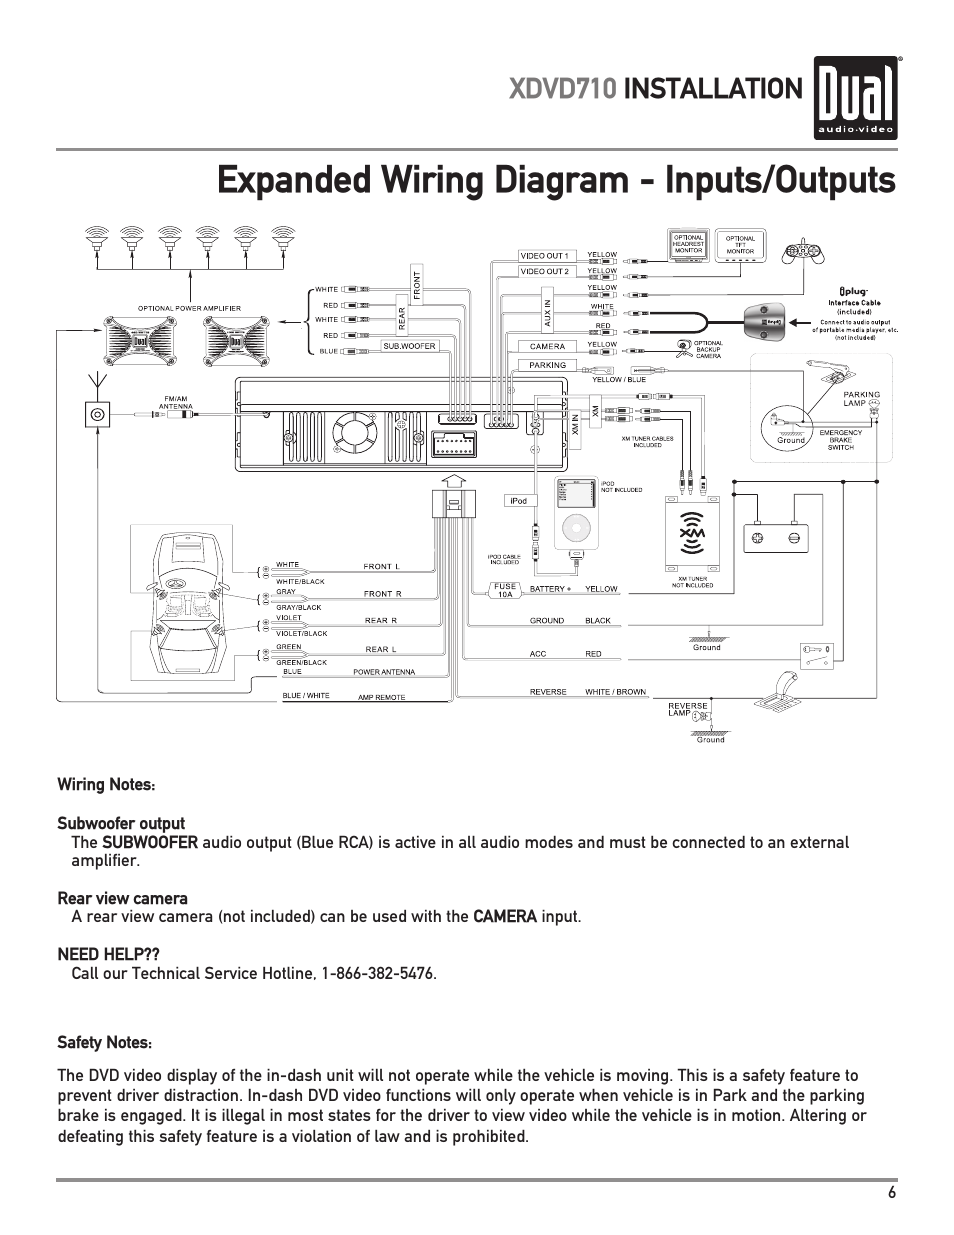 dual xdvd700 wire harness diagram